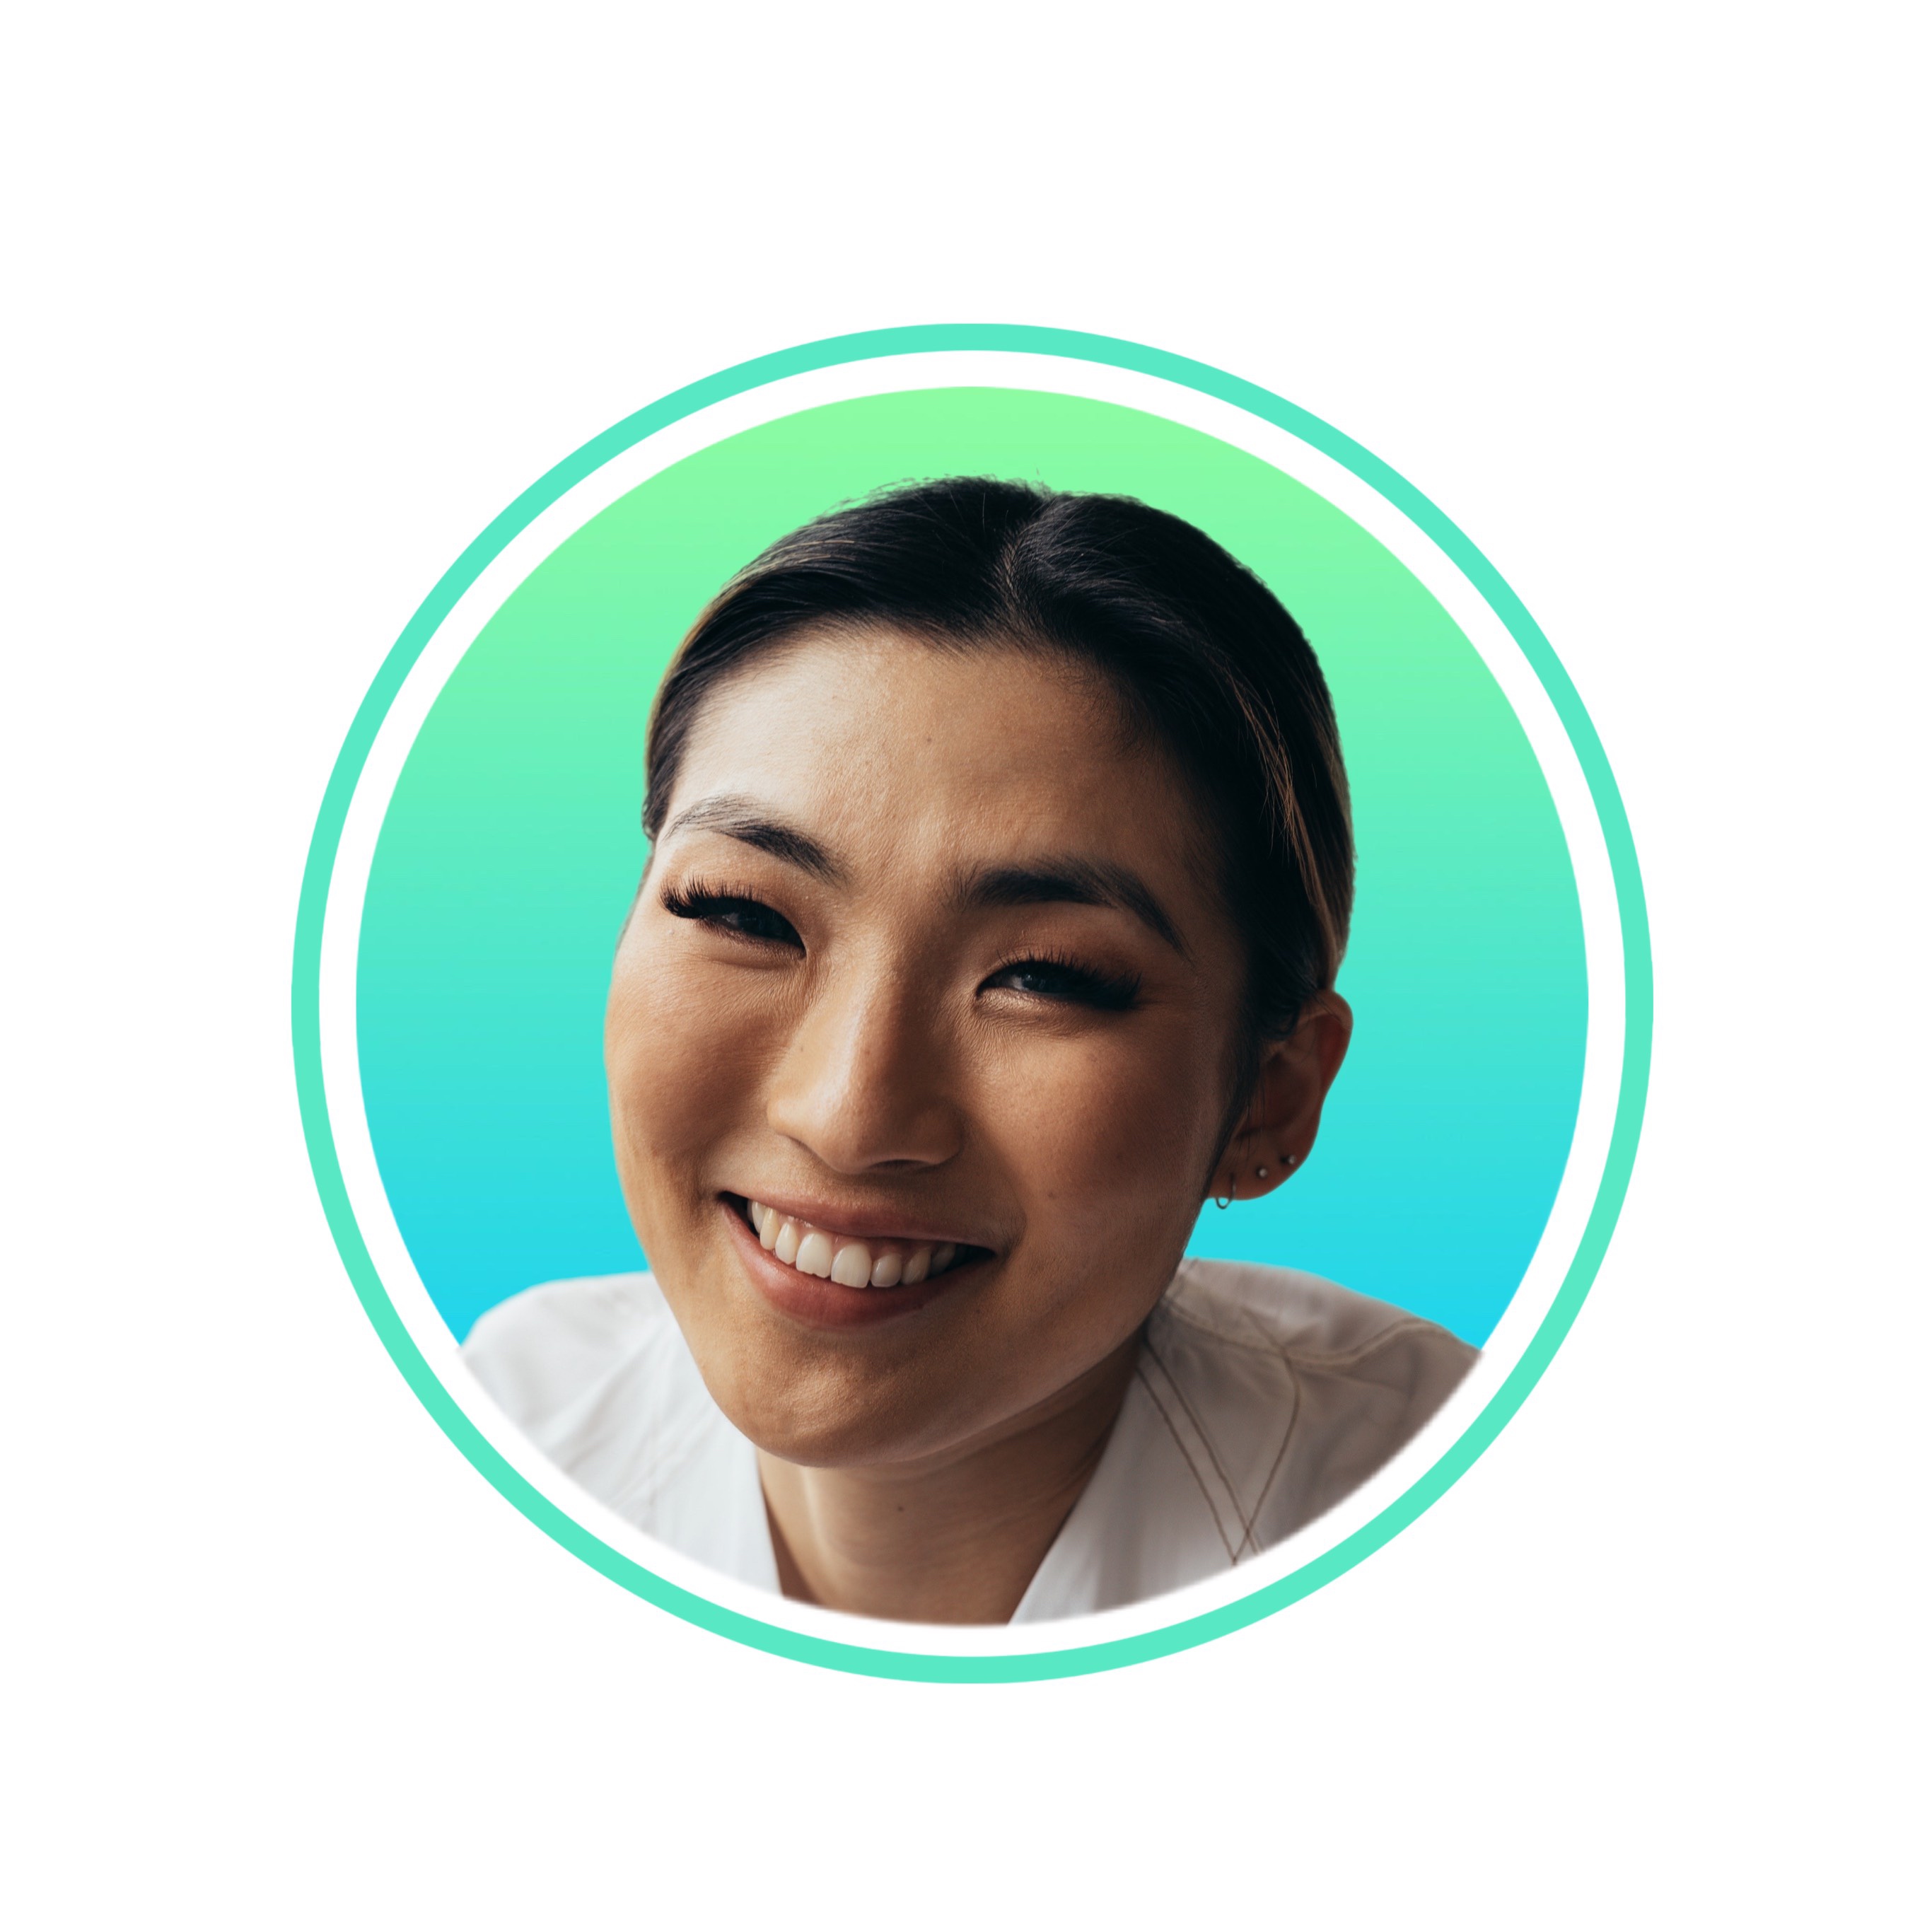 Profile Pic Of Woman In Blue Green Circle Smiling